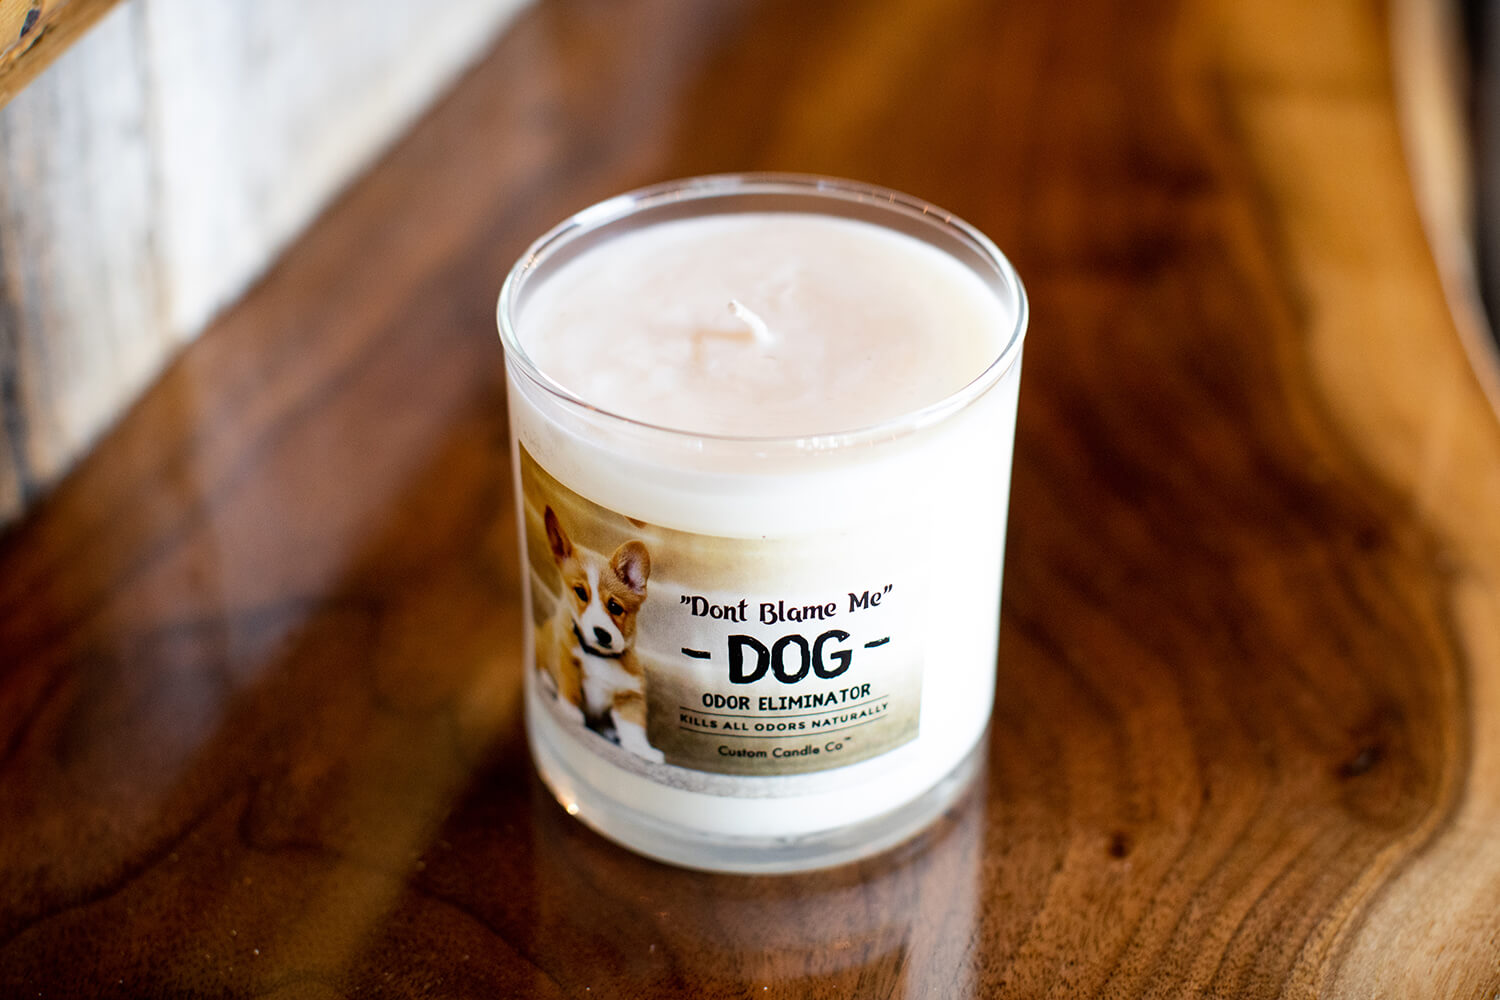 A small "Don't Blame Me" Dog Candle Odor Eliminator sits on a wooden table.